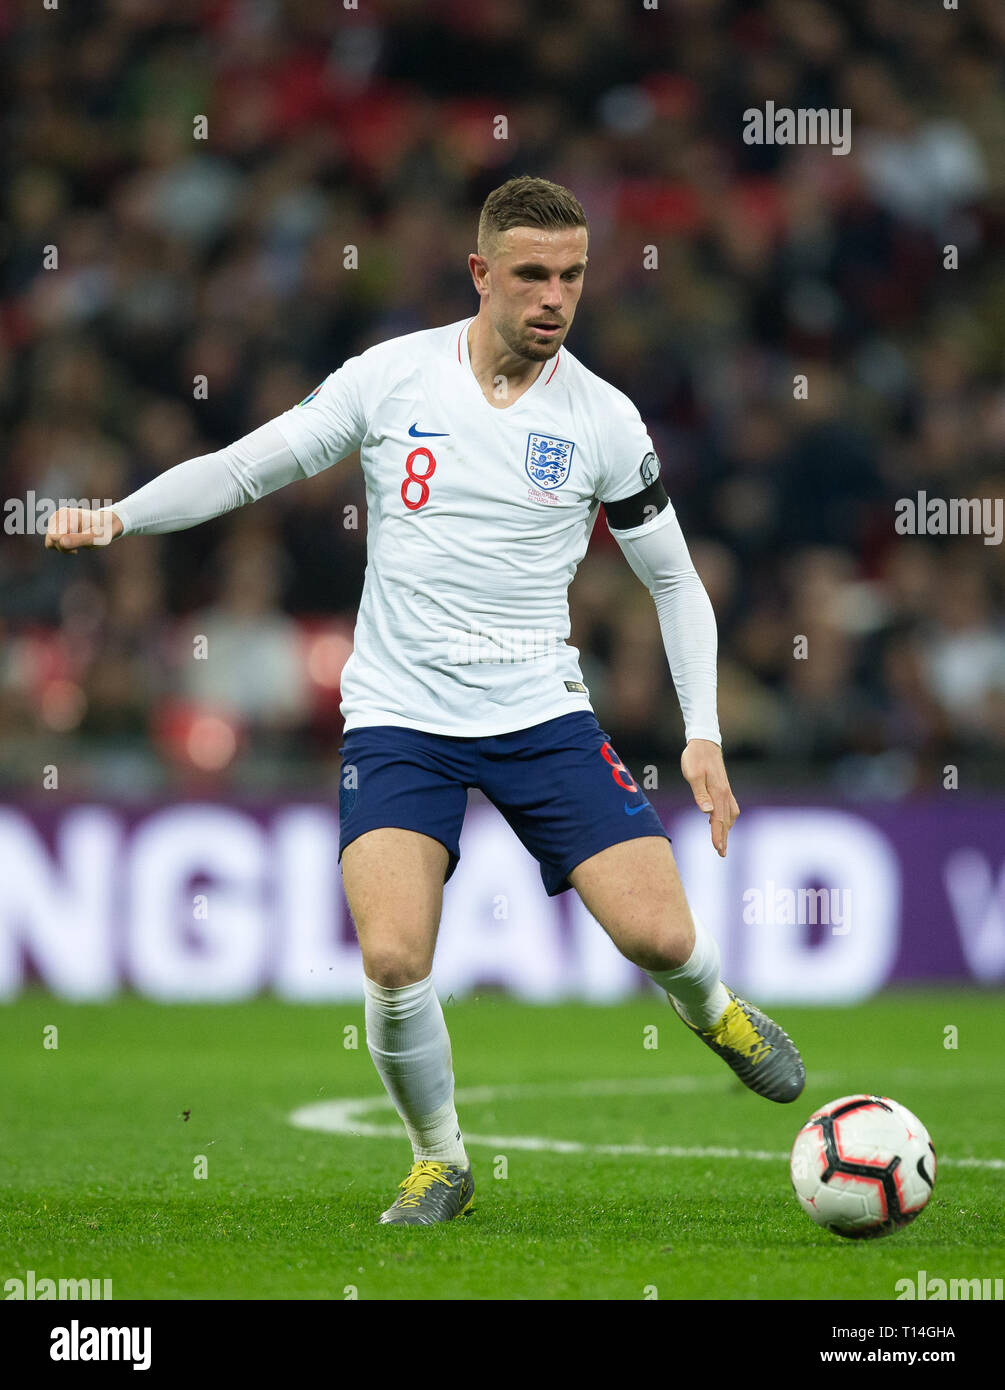 Jordan Henderson (Liverpool) of England during the UEFA 2020 Euro Qualifier match between England and Czech Republic at Wembley Stadium, London, Engla Stock Photo